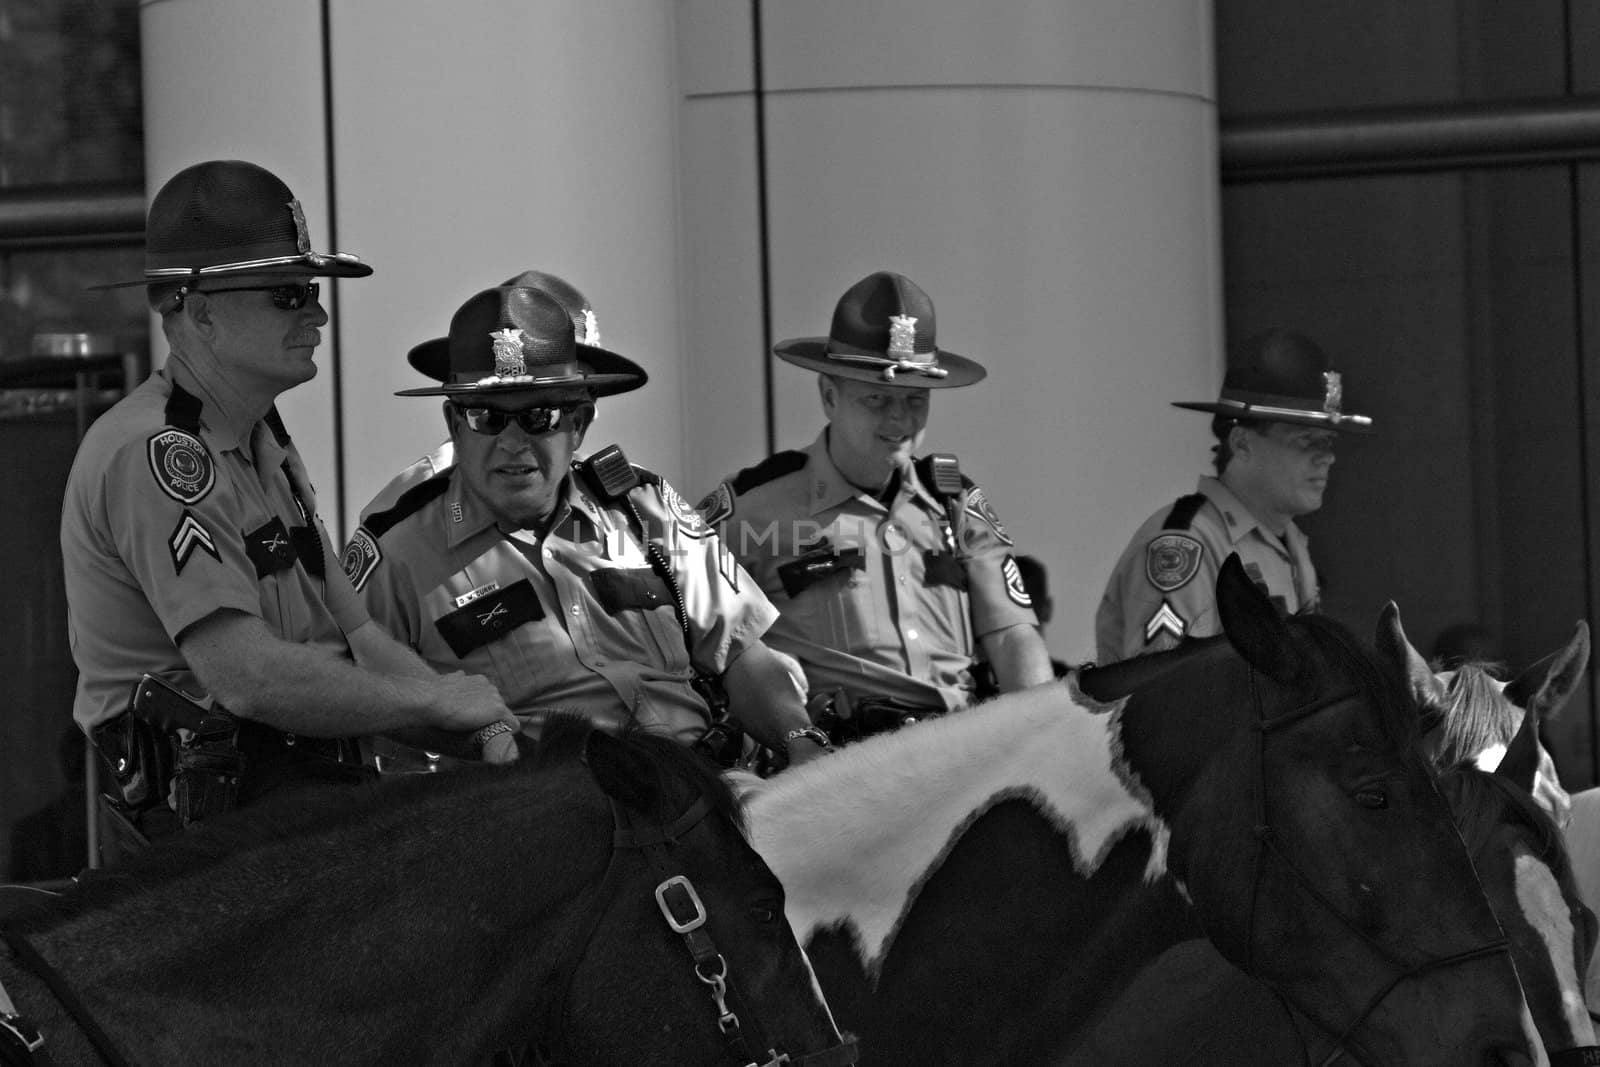 Houston Police on patrol at the protest by the Rainforest Coalition at the annual Chevron board meeting.